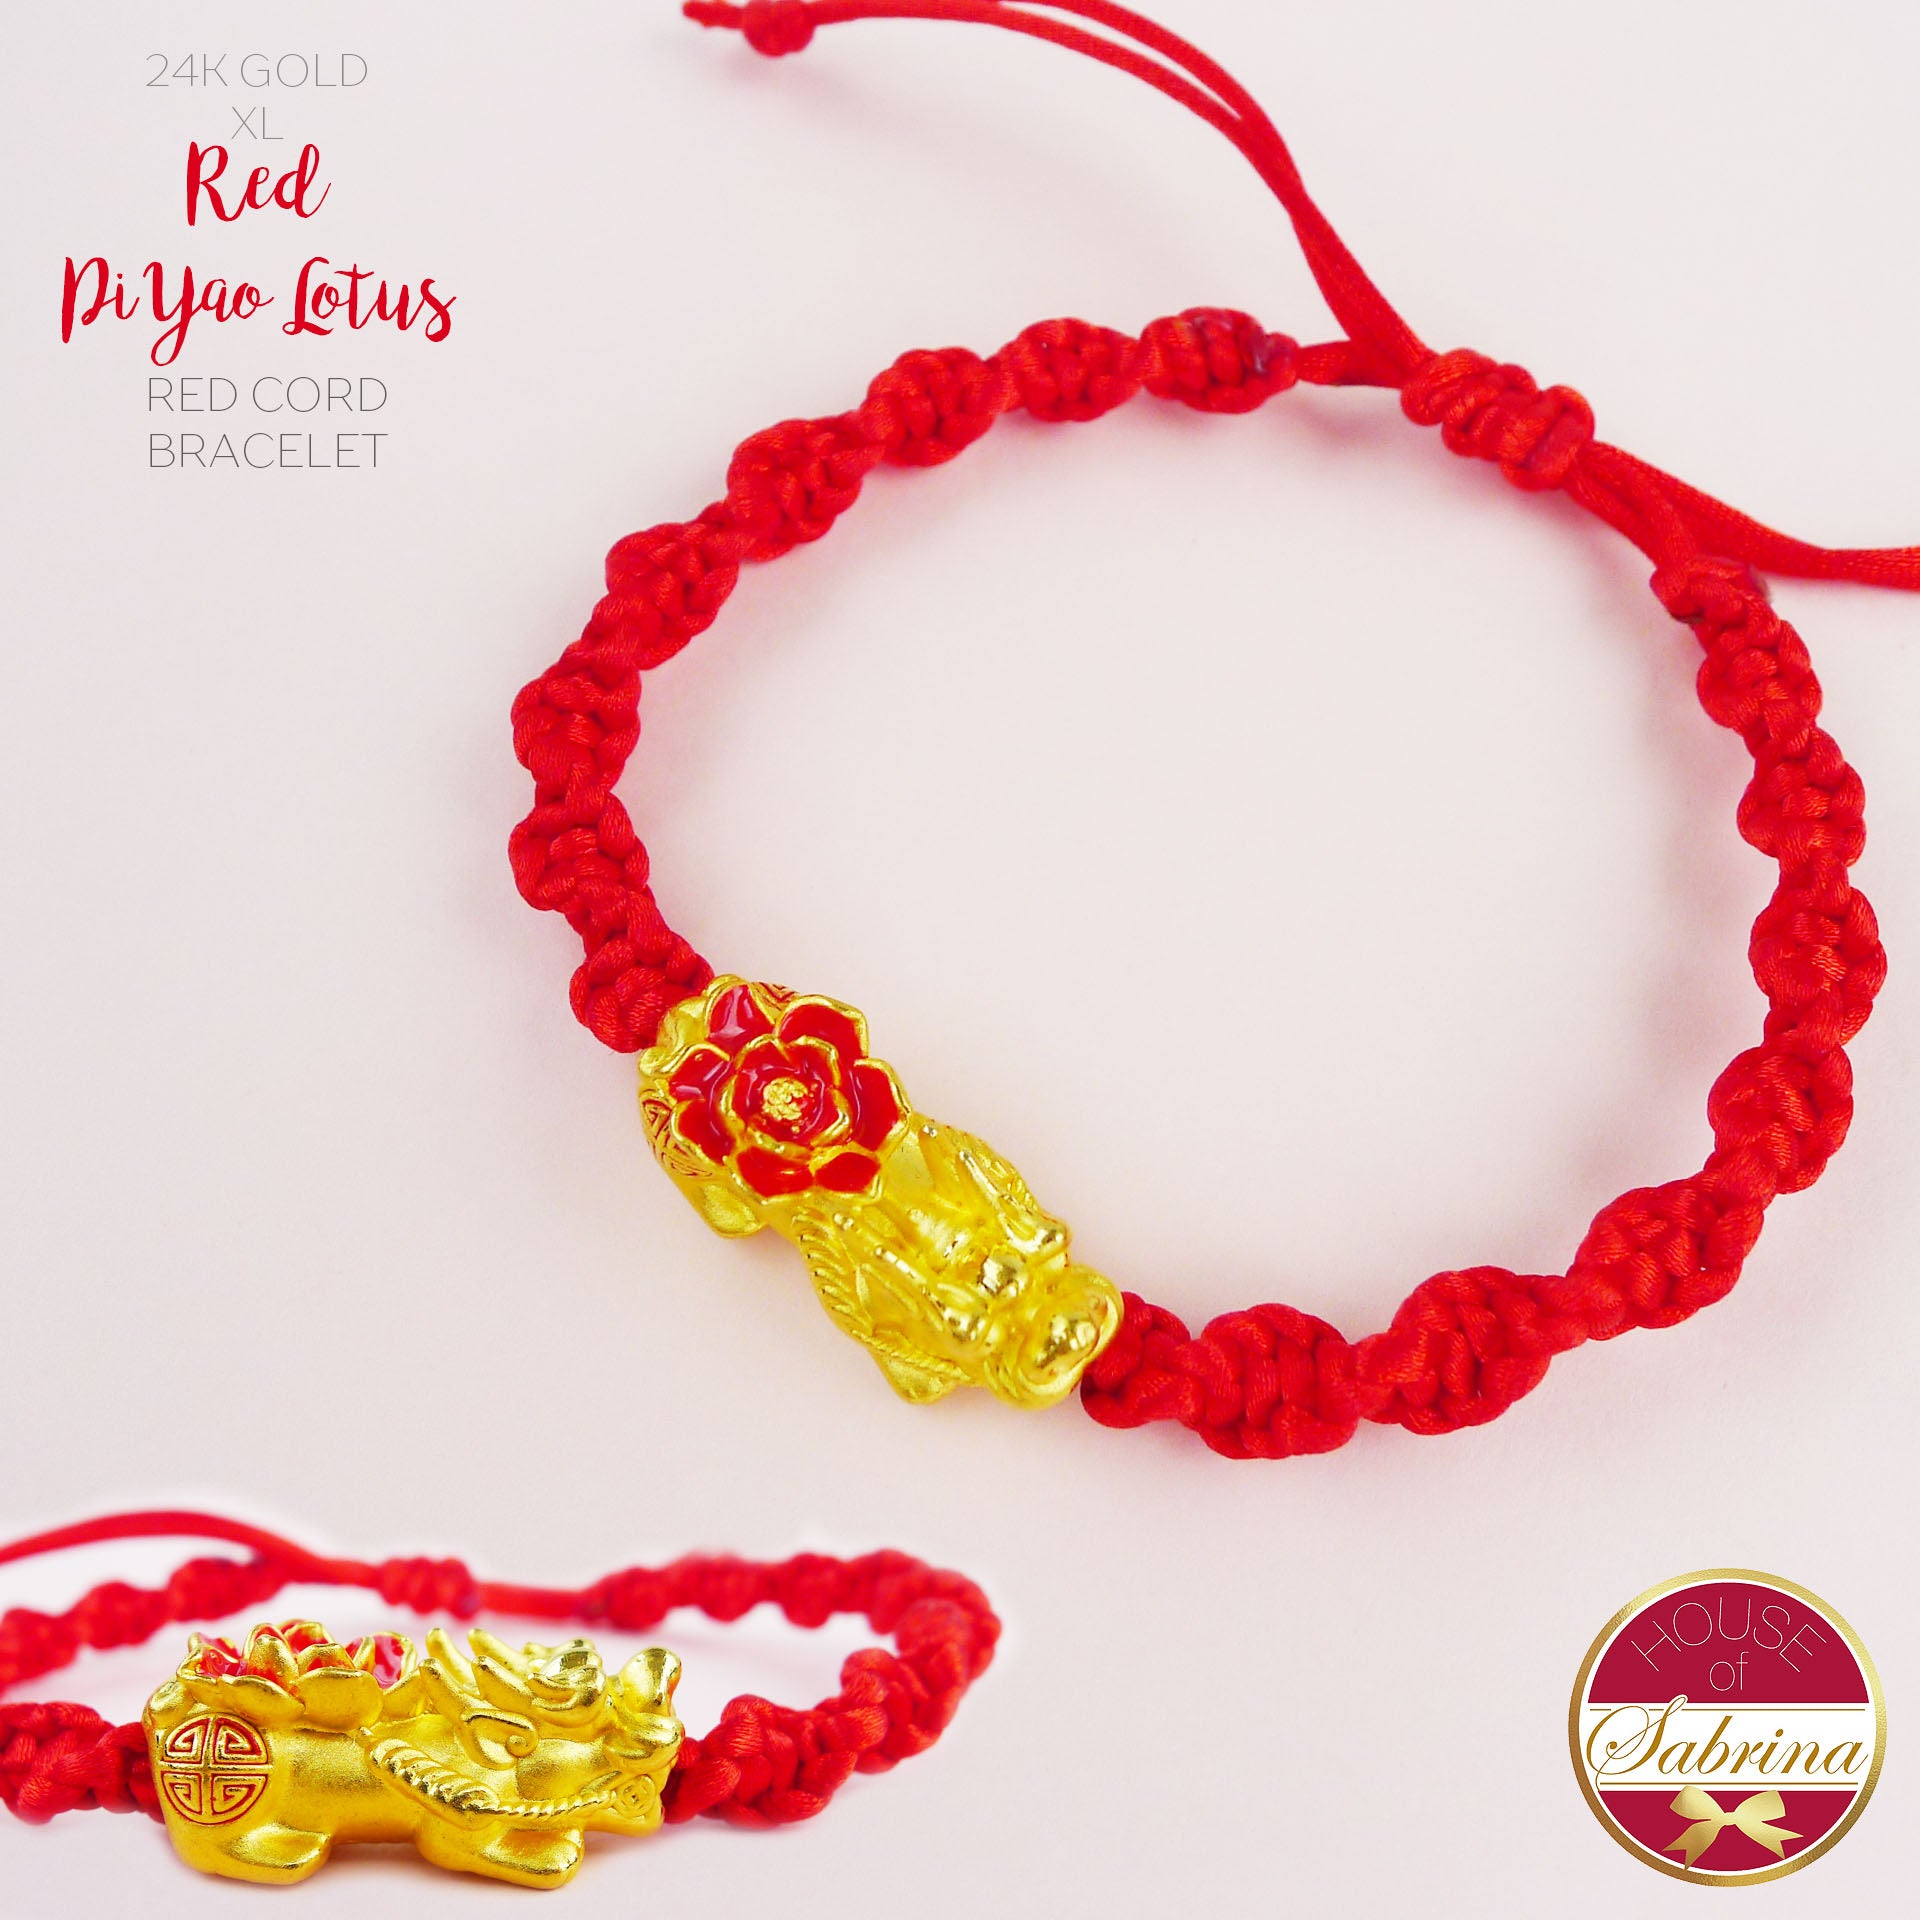 24K GOLD XL RED PI YAO LOTUS ON RED CORD LUCKY CHARM BRACELET